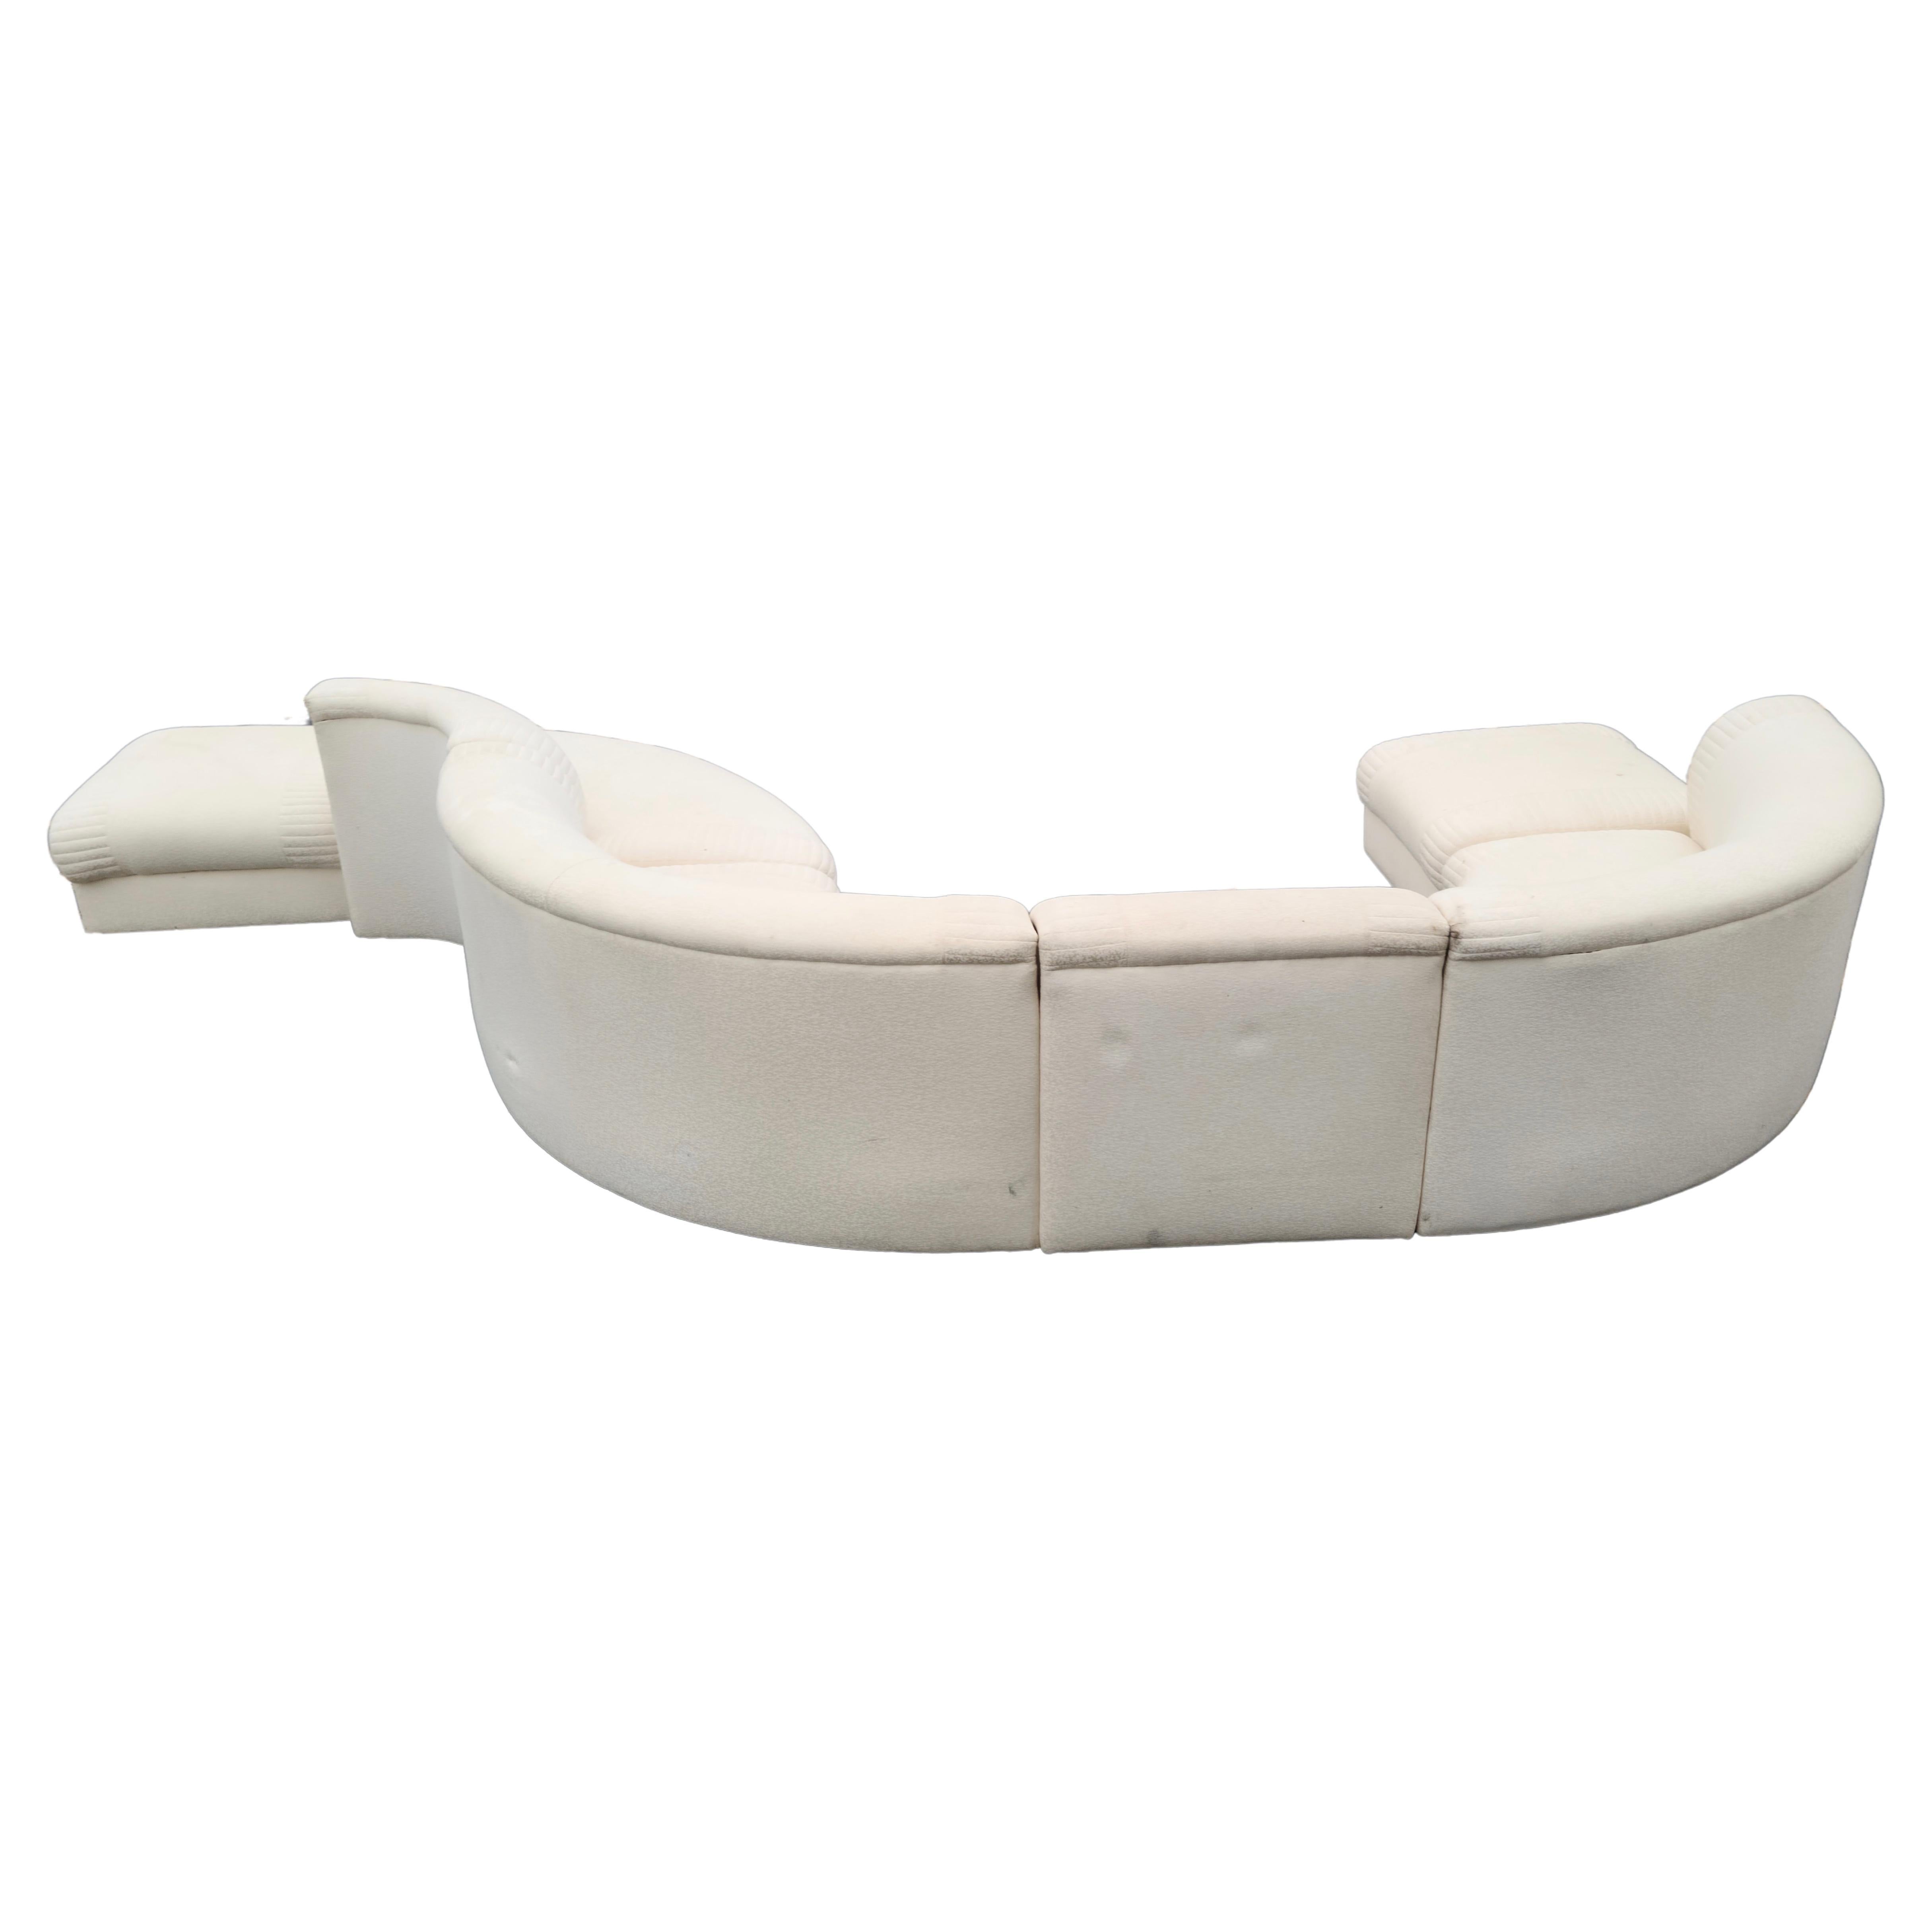 Late 20th Century Serpentine sectional sofa by Weiman style of Kagan